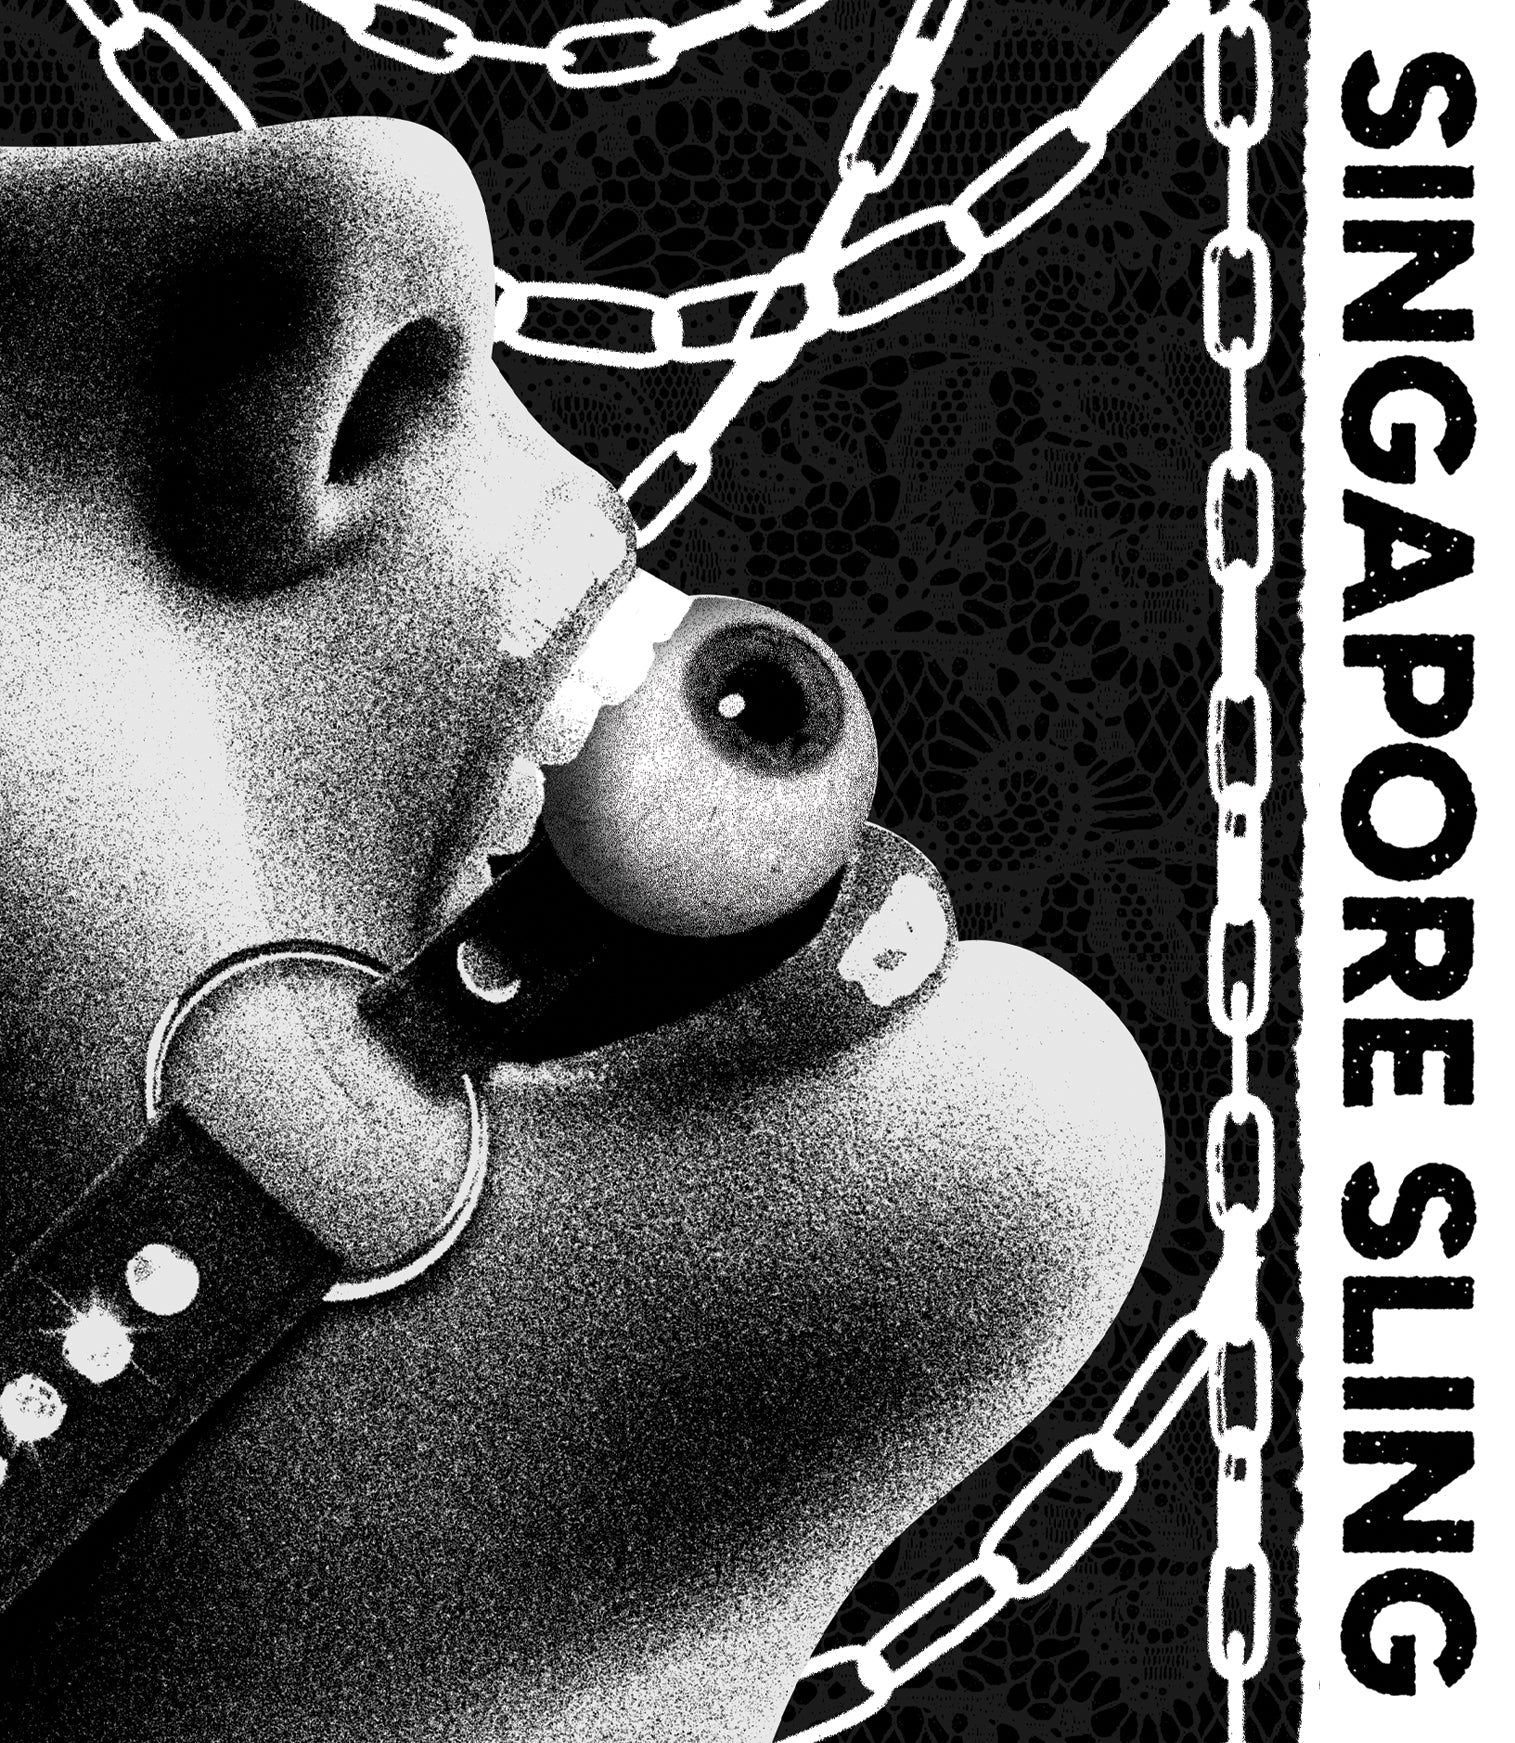 SINGAPORE SLING (LIMITED EDITION) BLU-RAY